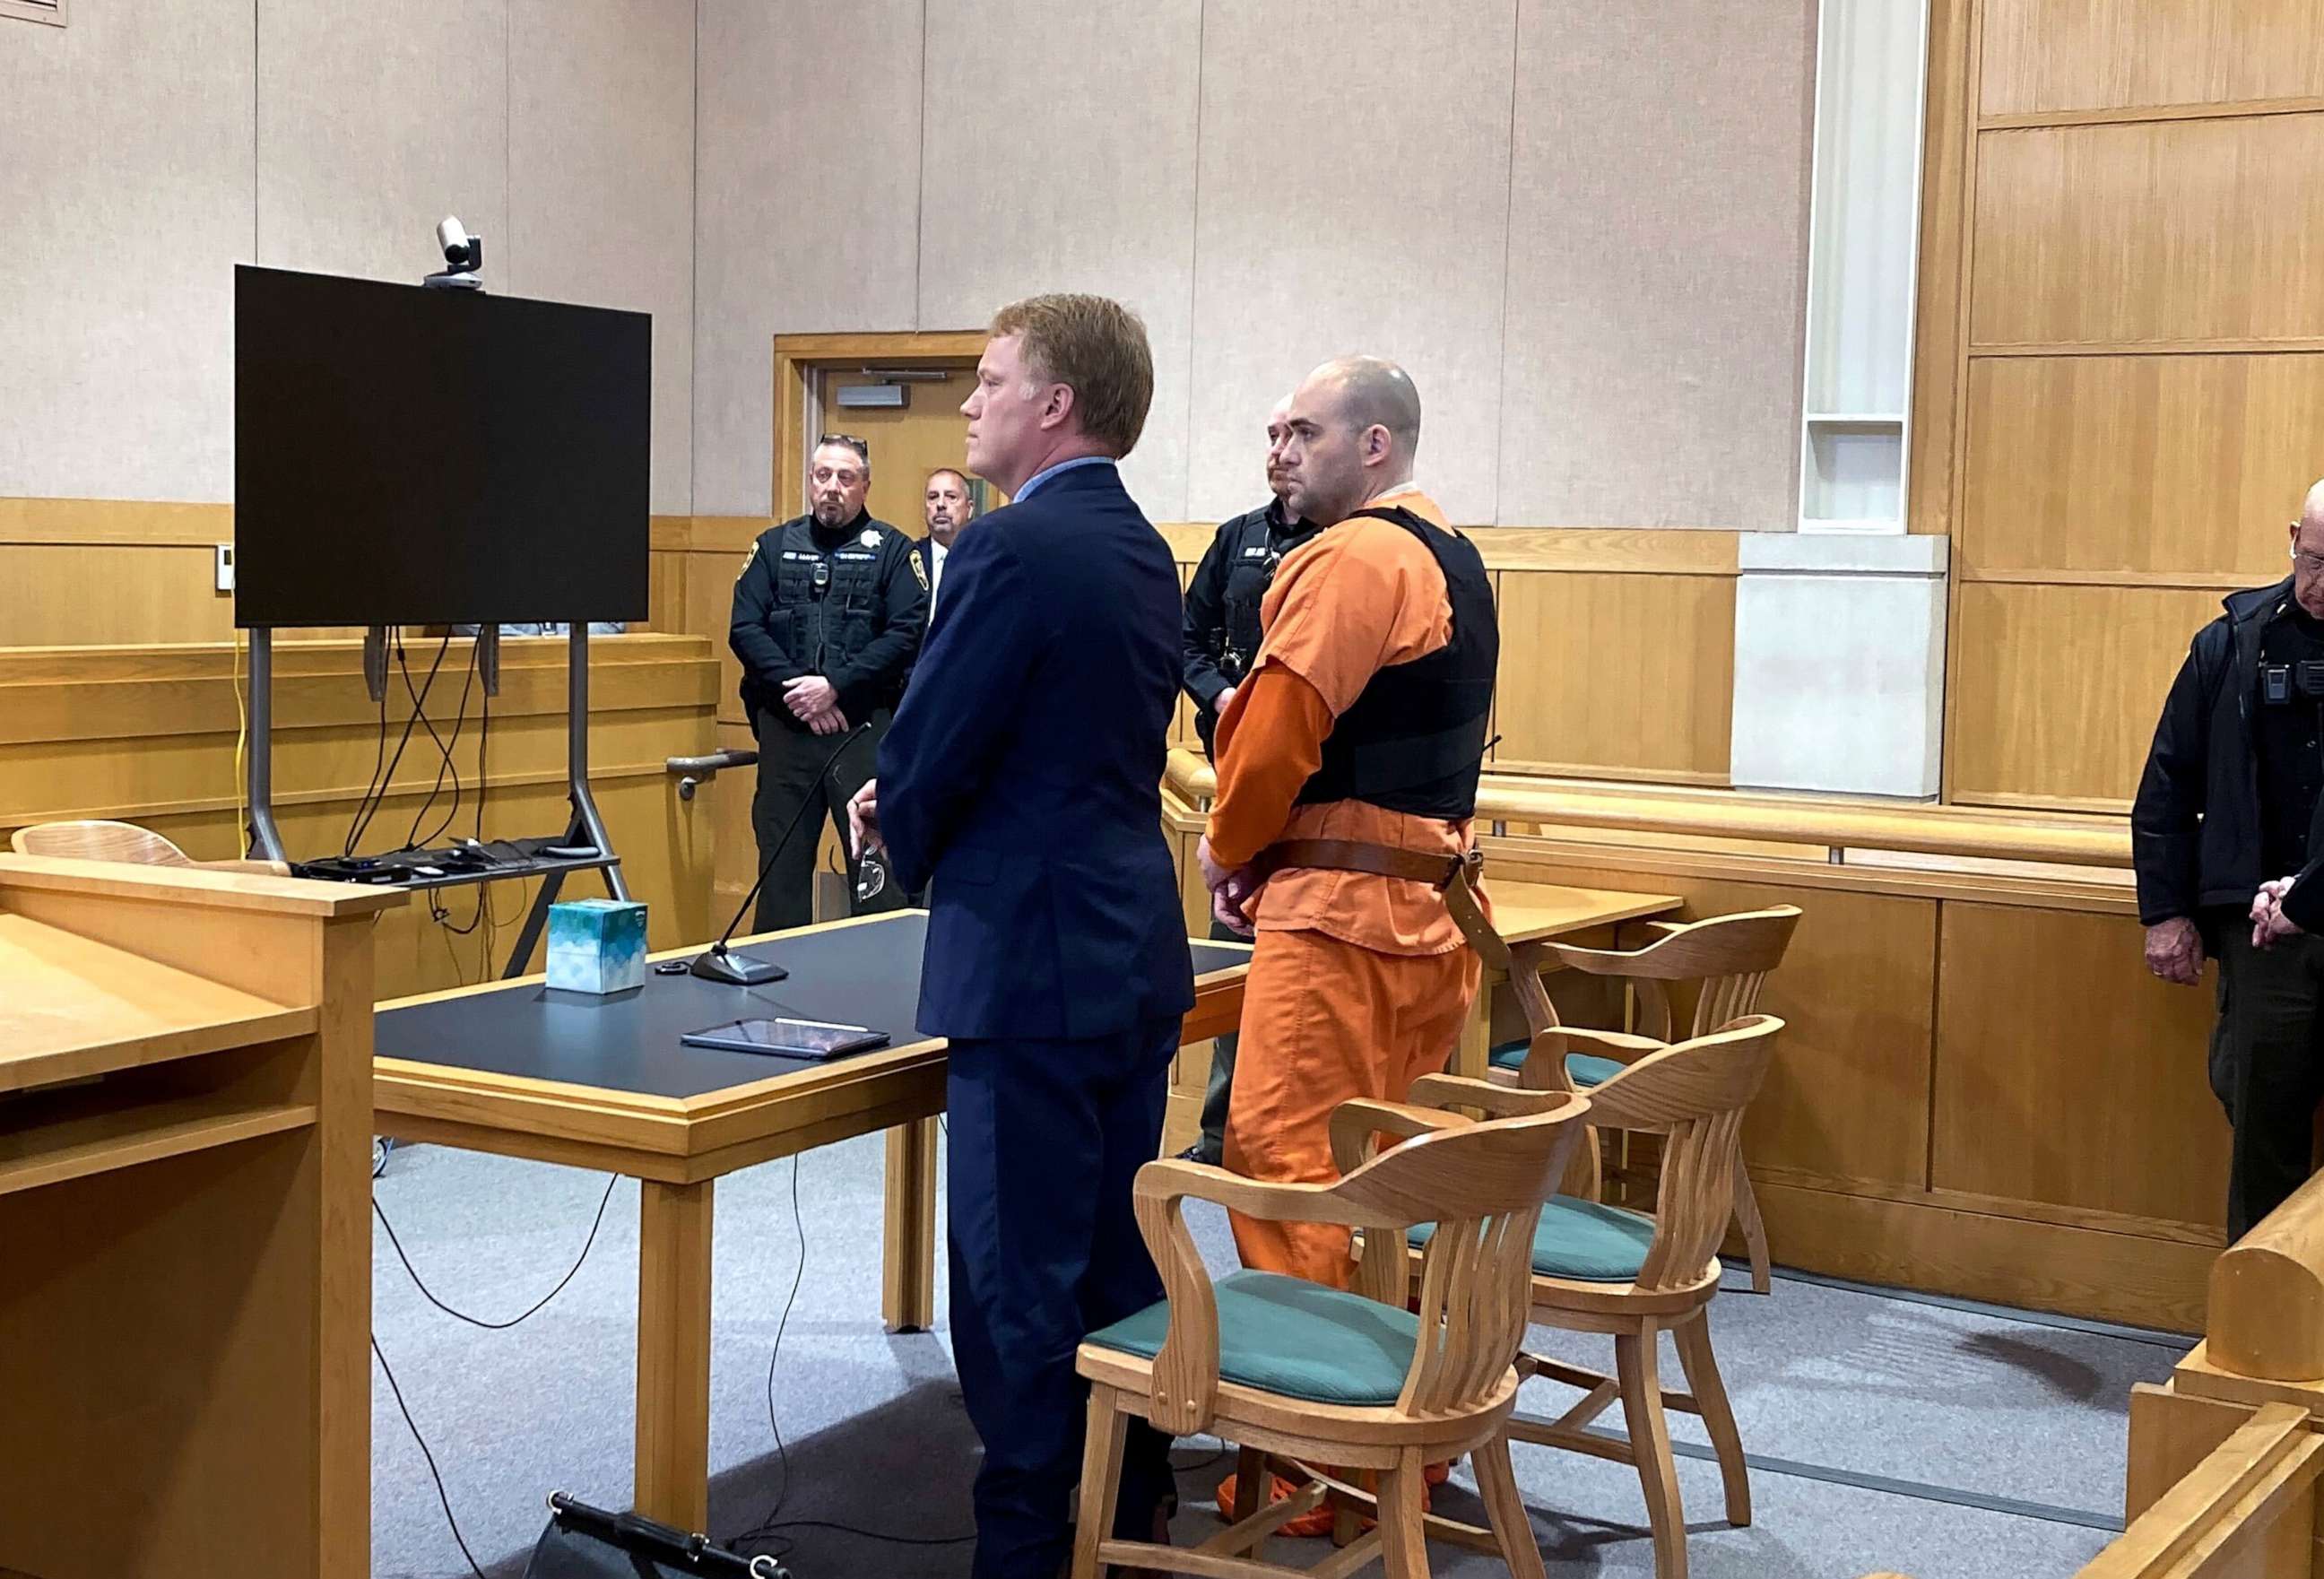 PHOTO: Joseph Eaton, the suspect in a shooting spree in Maine, appears in court in West Bath, Maine, April 20, 2023.